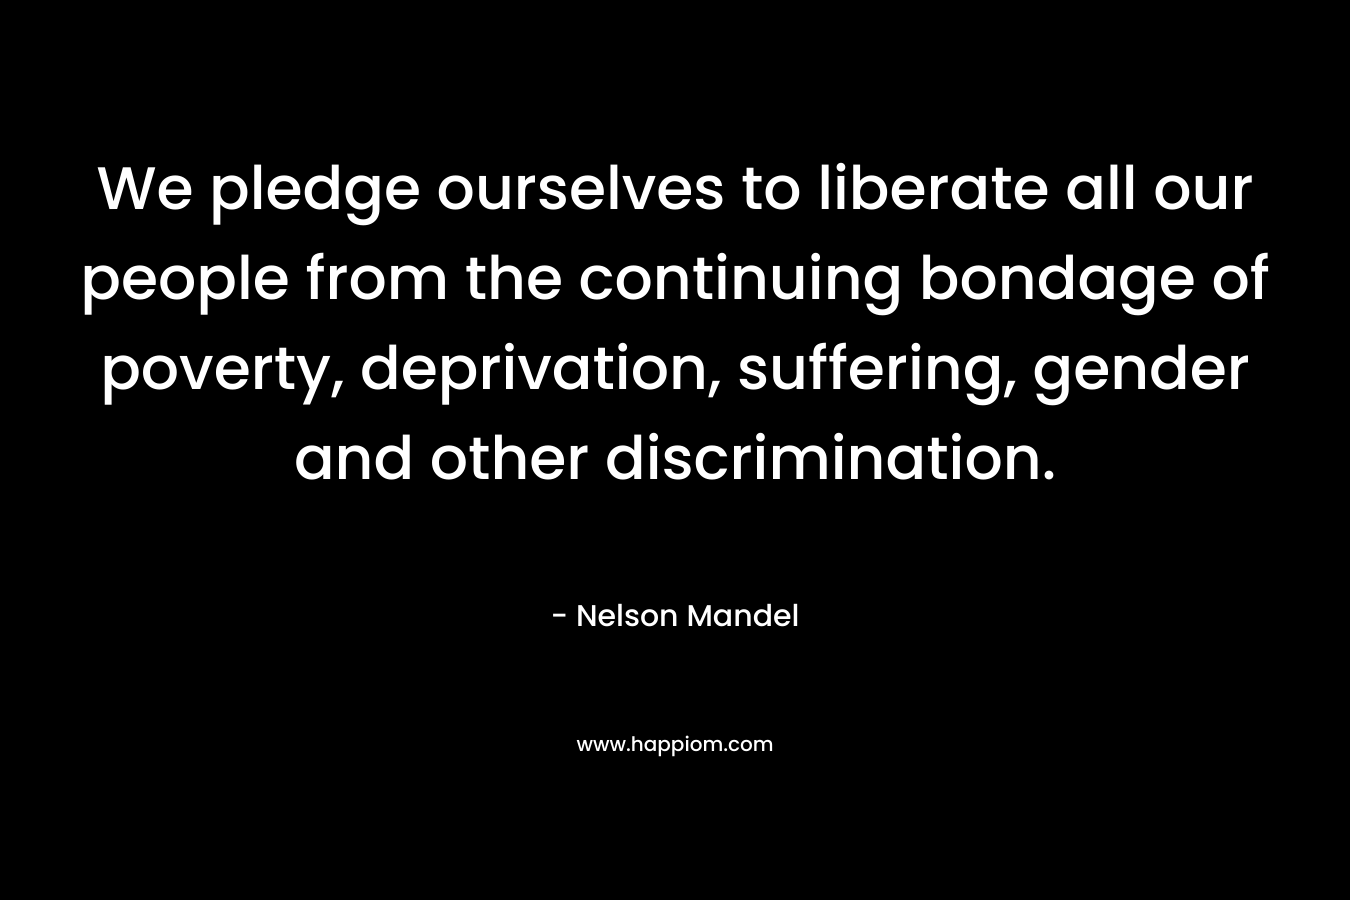 We pledge ourselves to liberate all our people from the continuing bondage of poverty, deprivation, suffering, gender and other discrimination. – Nelson Mandel